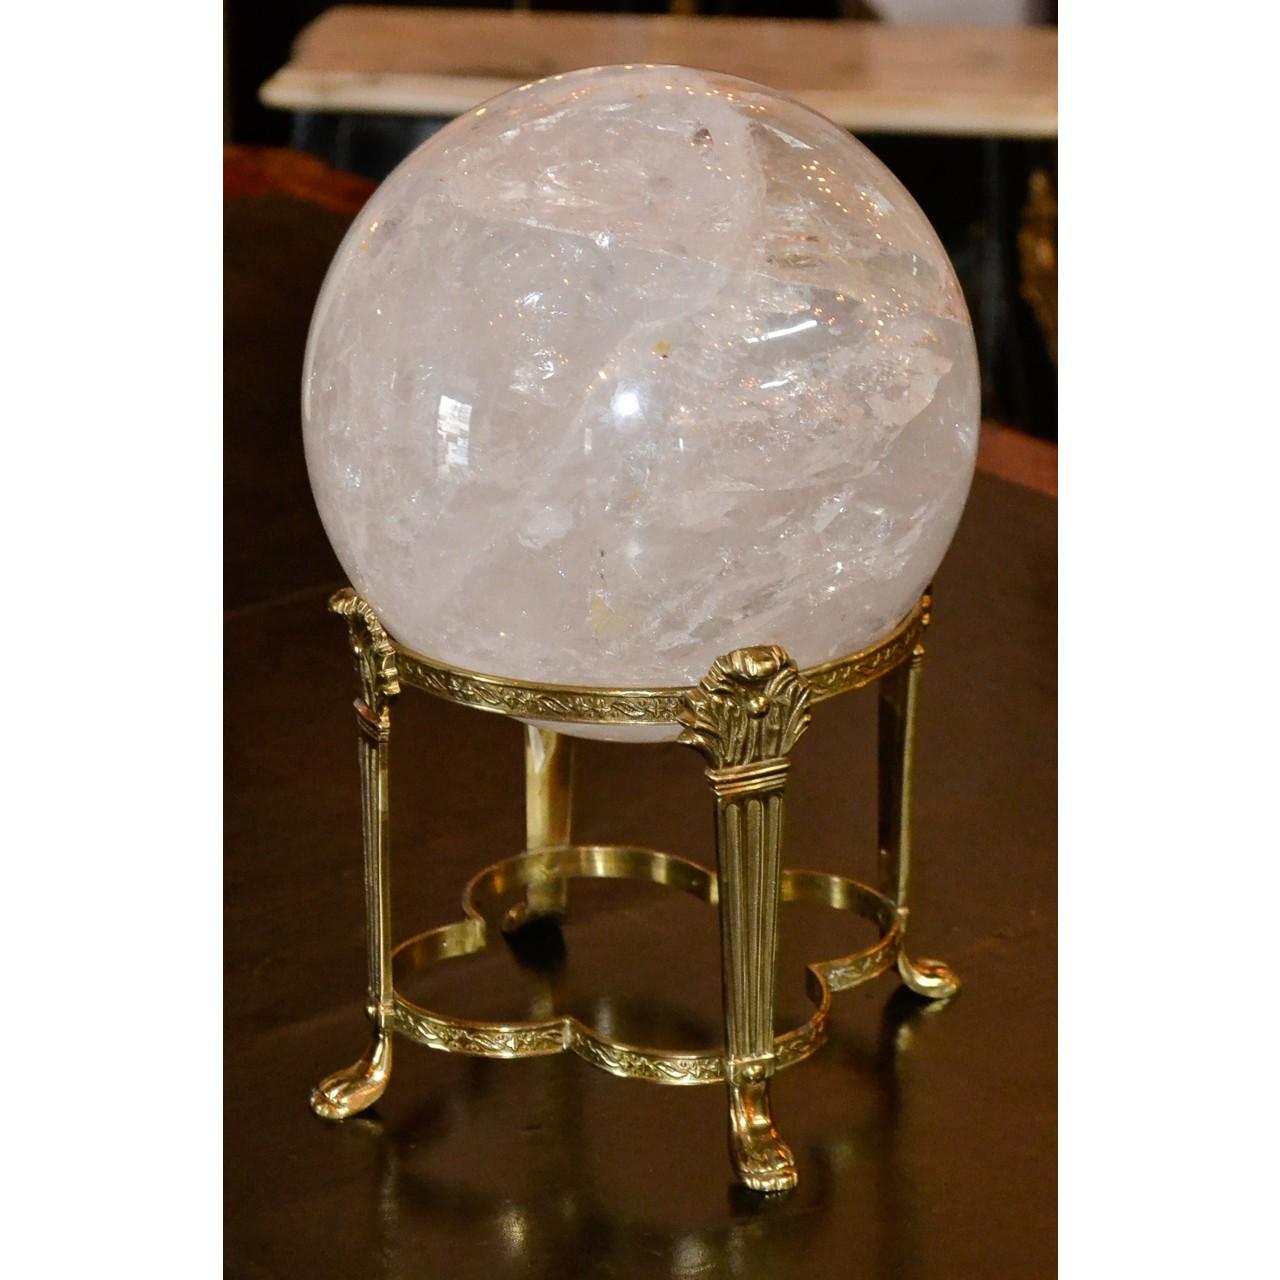 7 inch wide natural Brazilian rock crystal sphere resting on a removable French brass stand.
11 inches total height.